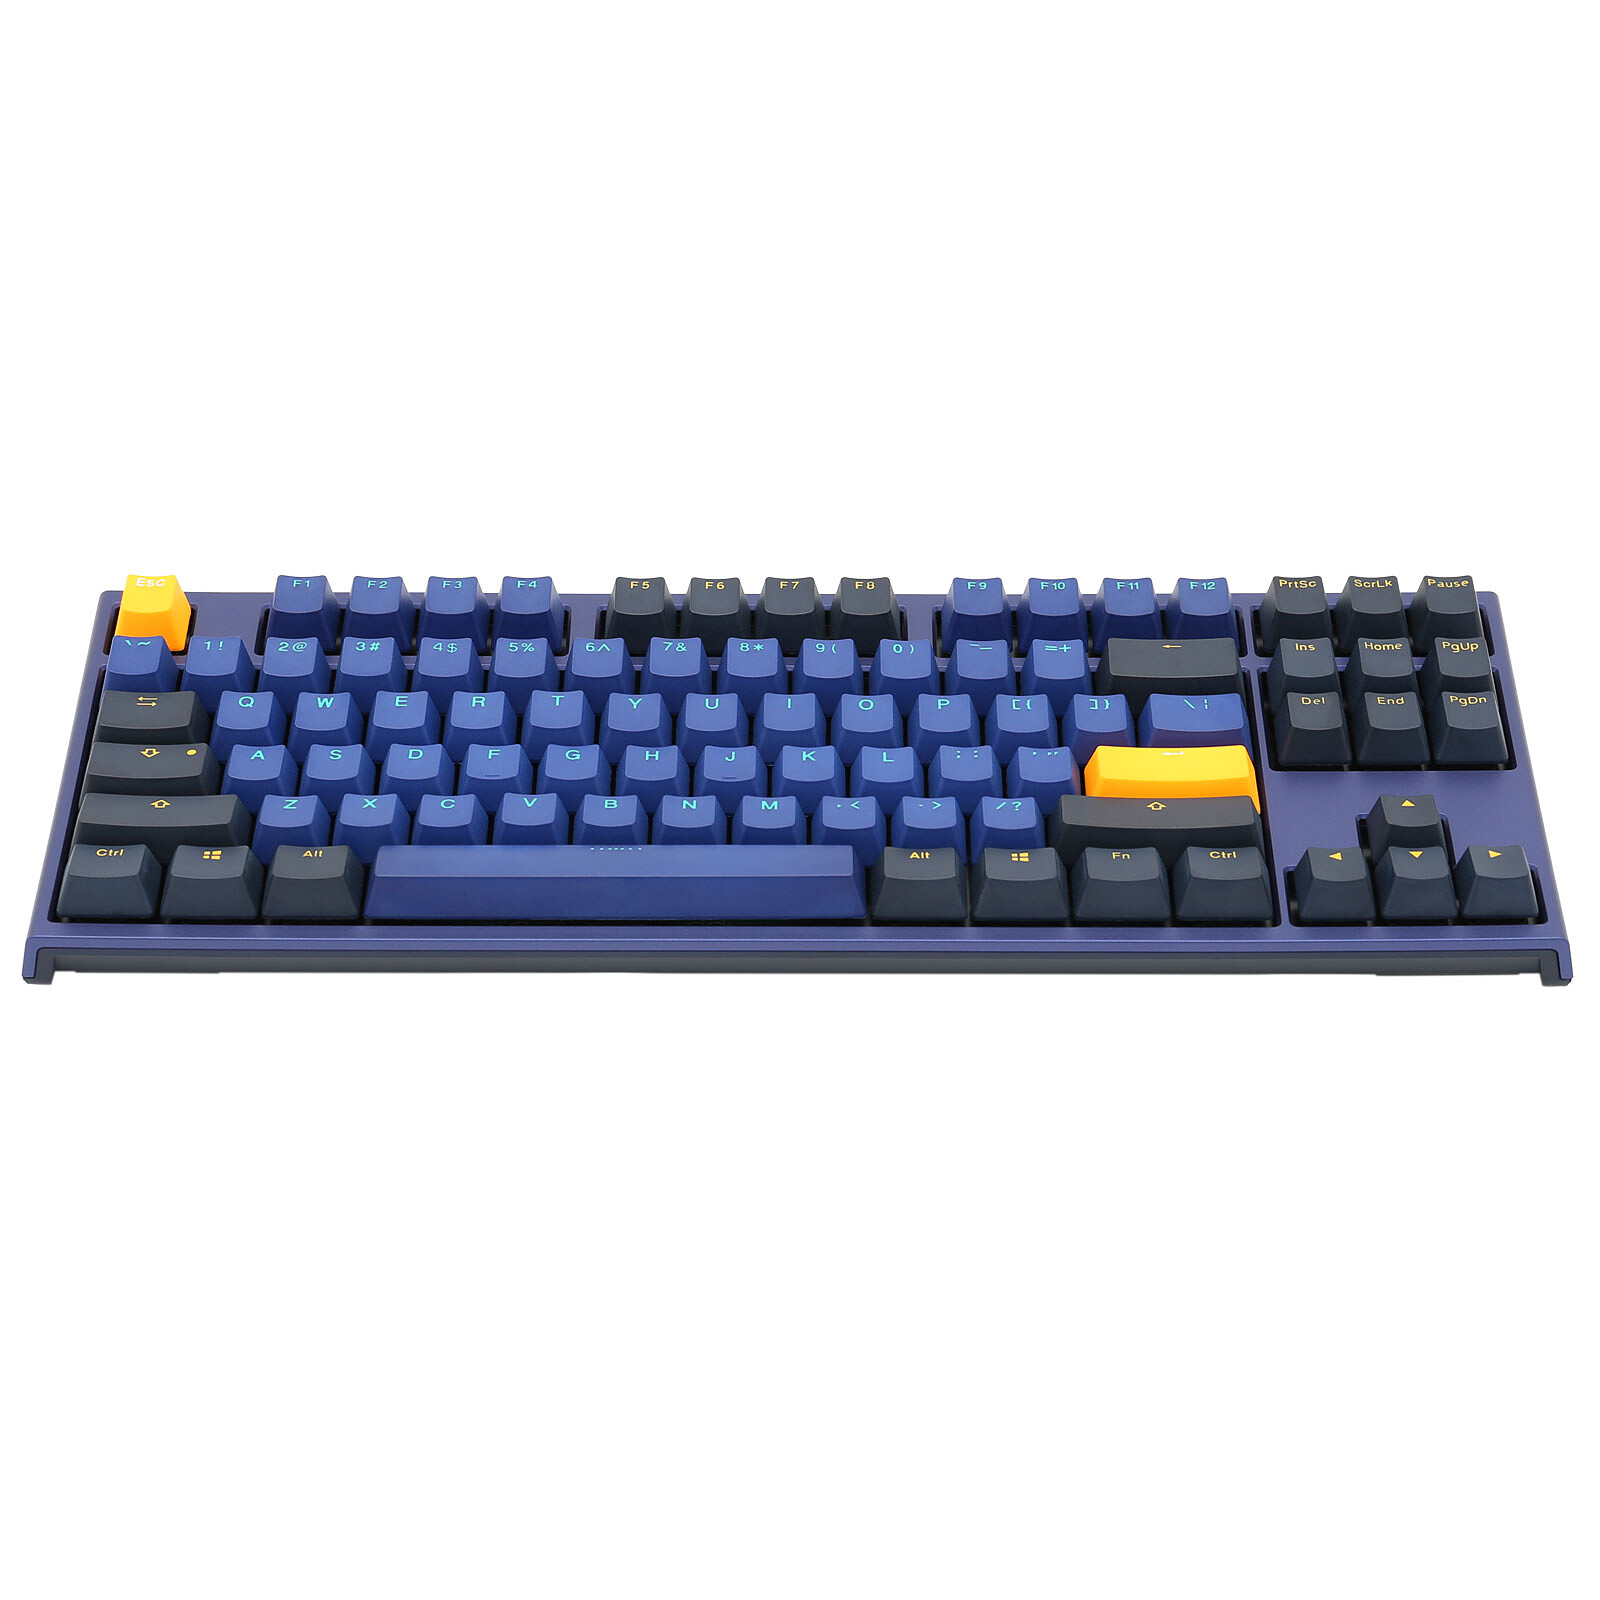 Ducky Channel One 2 Tkl Horizon Cherry Mx Speed Silver Clavier Pc Ducky Channel Sur Ldlc